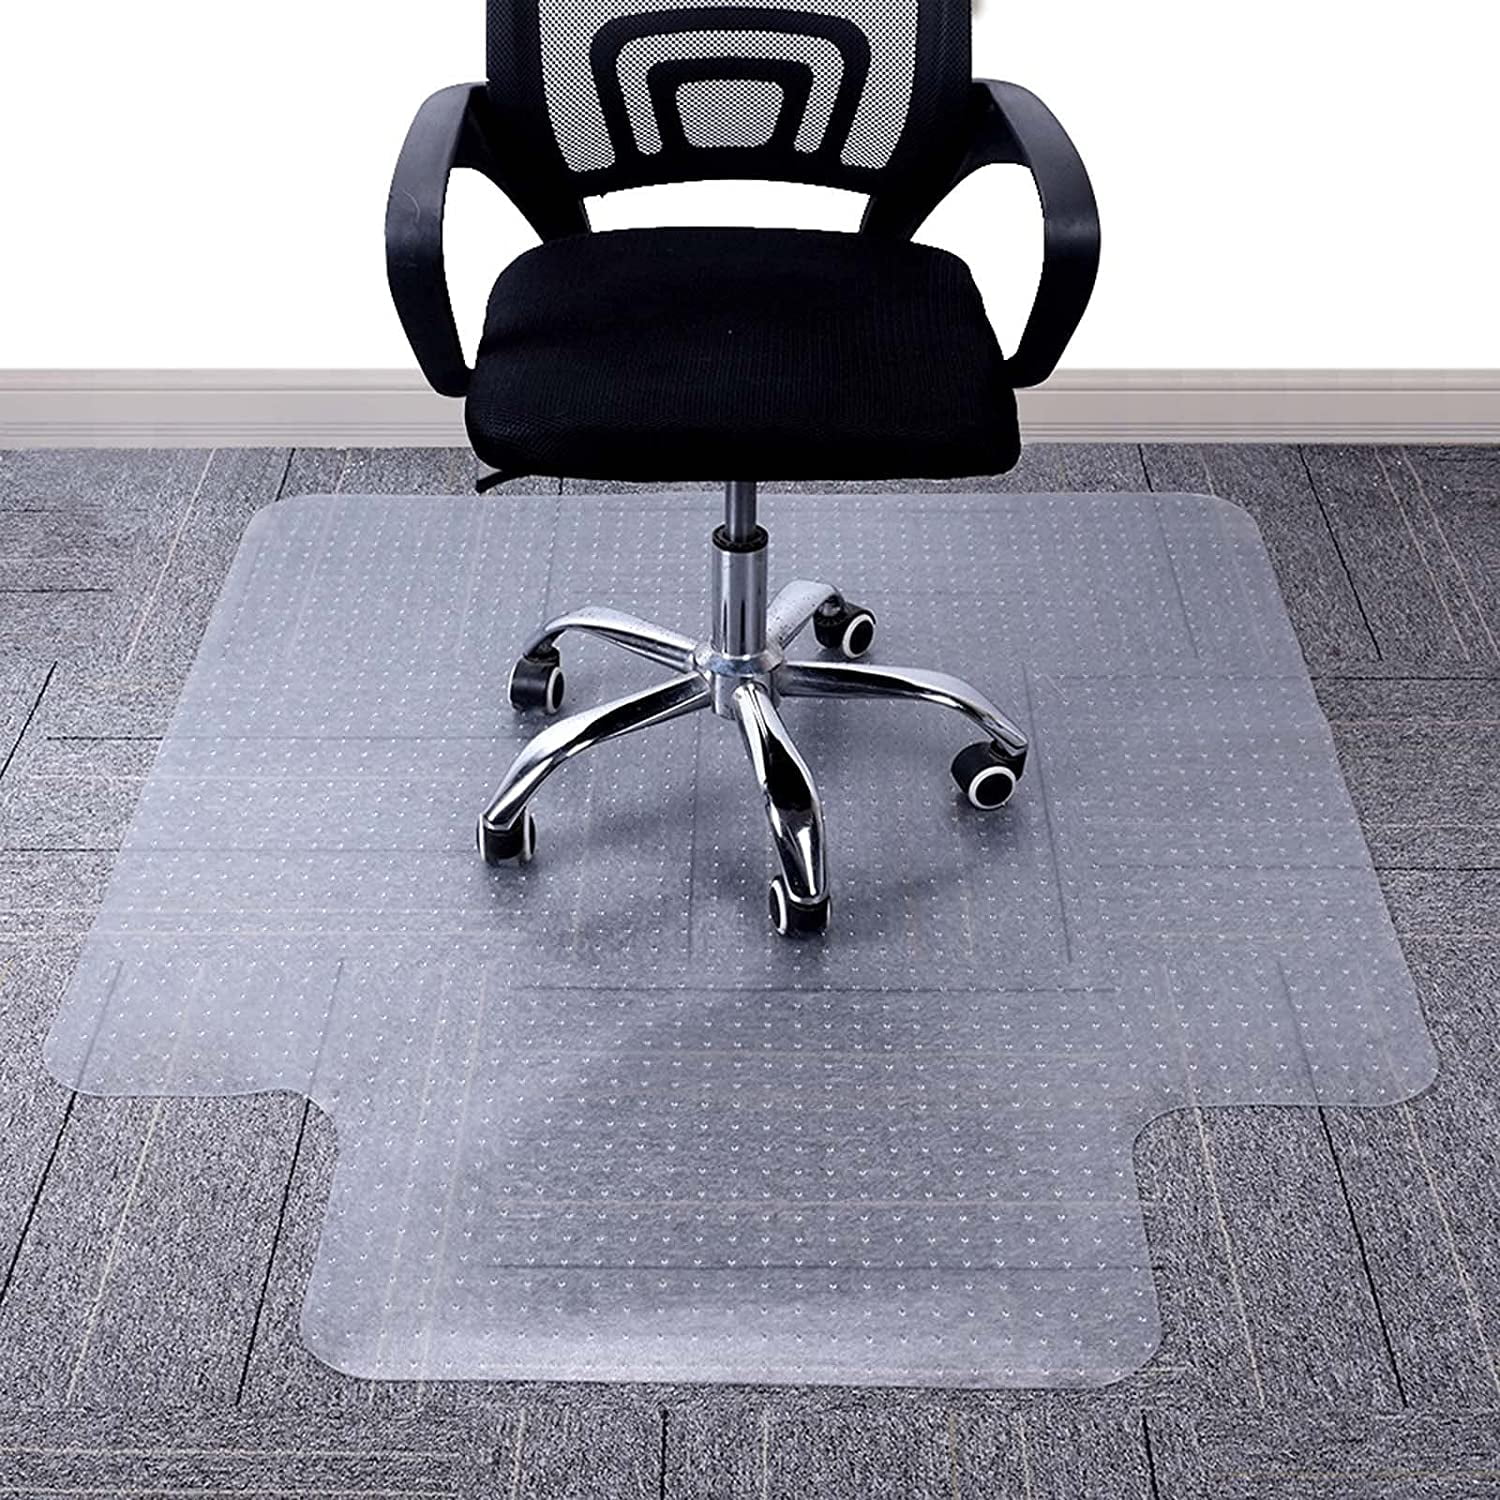 New 36" x 48" PVC Chair Floor Mat Home Office Protector For Office Home Carpet 